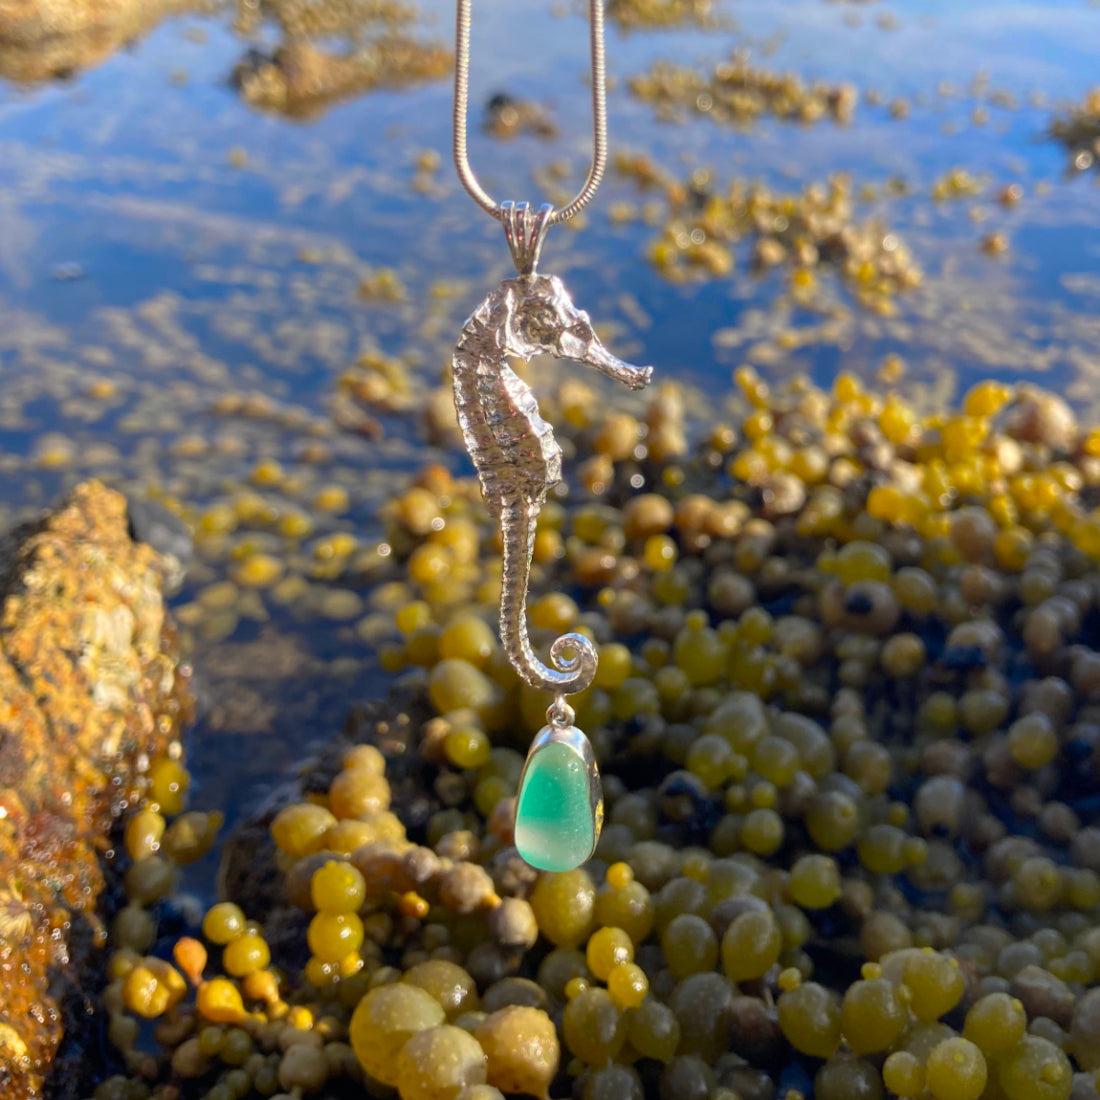 Seahorse Necklace Pendant with 18